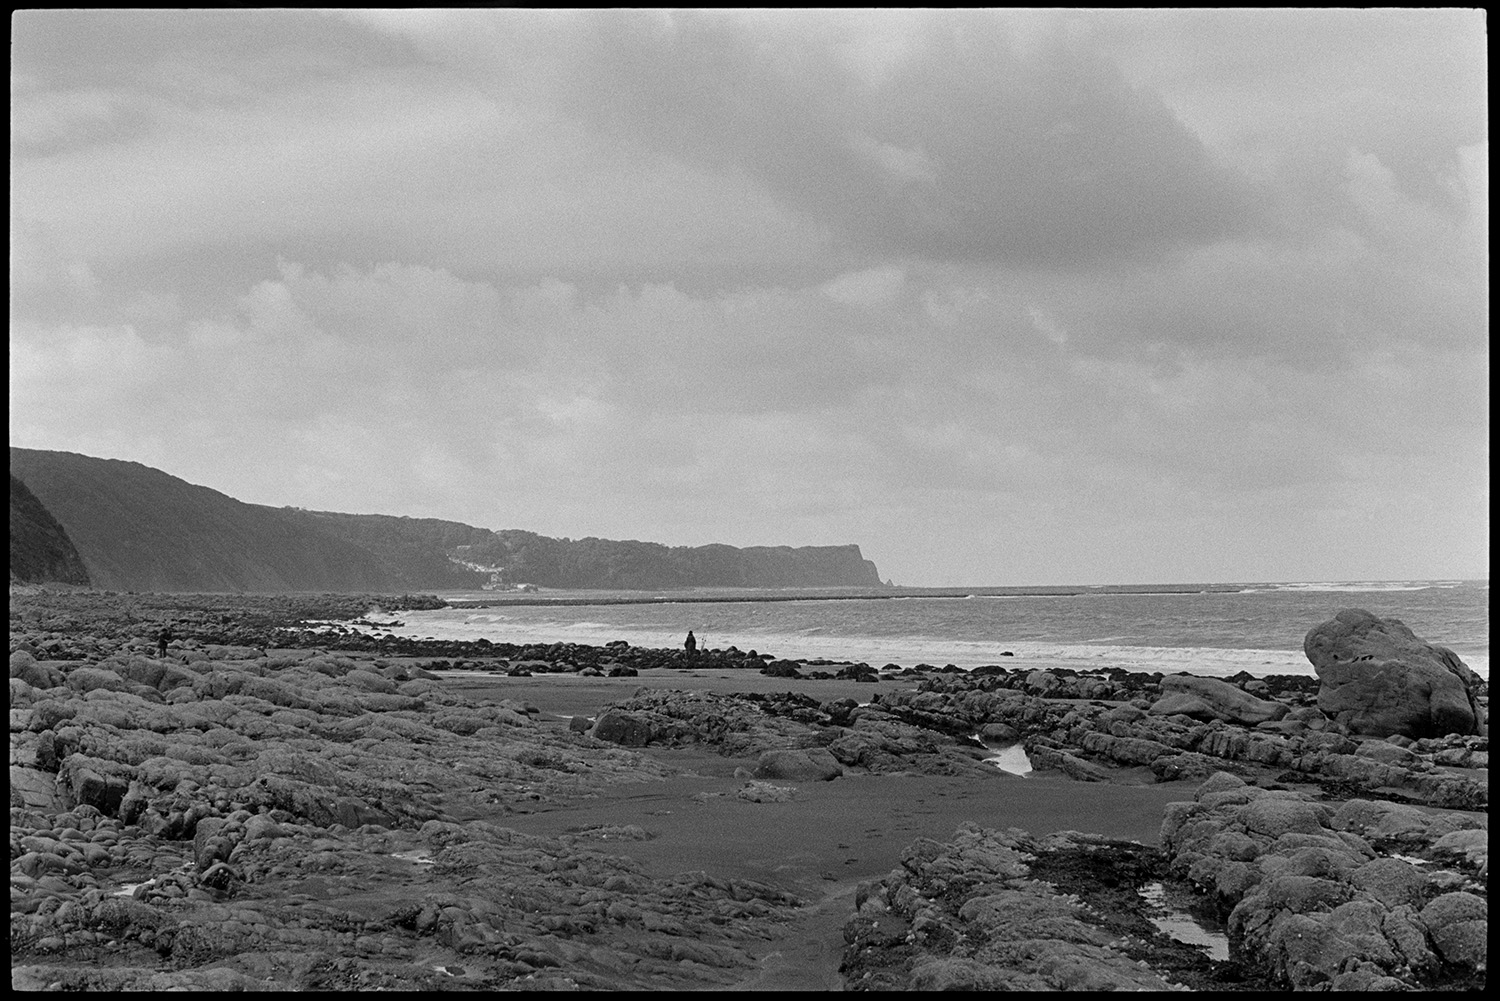 Seaside, beach with shells on rocks, limpets. 
[The rocky seashore or beach at Bucks Mills. A person can be seen fishing on the shoreline and cliff are visible in the background.]